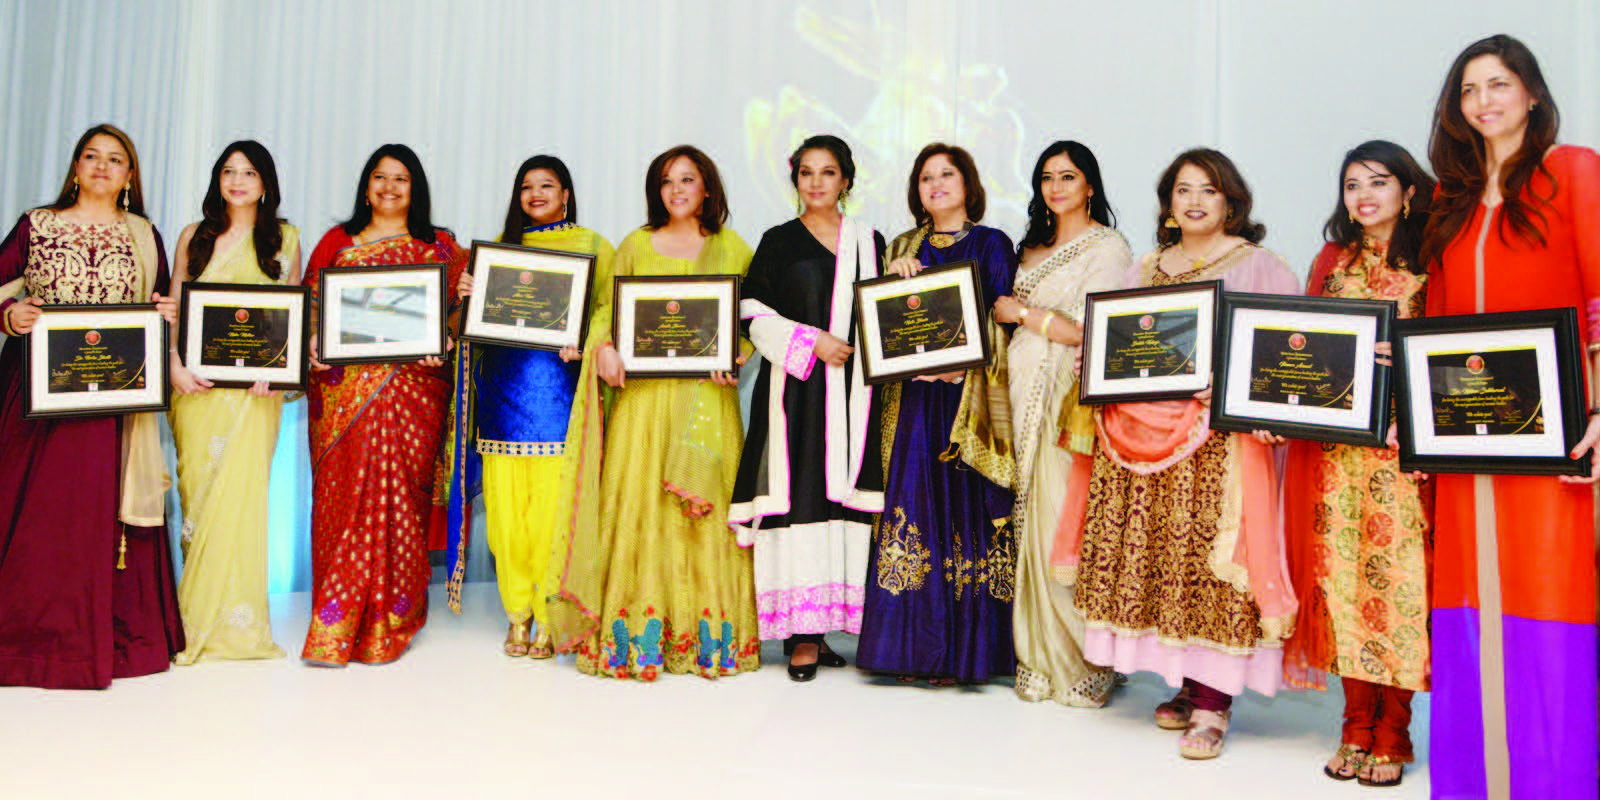 Honorees with Shabana Azmi (6th from left). Neeta Bhasin, organizer of 'Diwali at Times Square' is seen to the left of Shabana Azmi